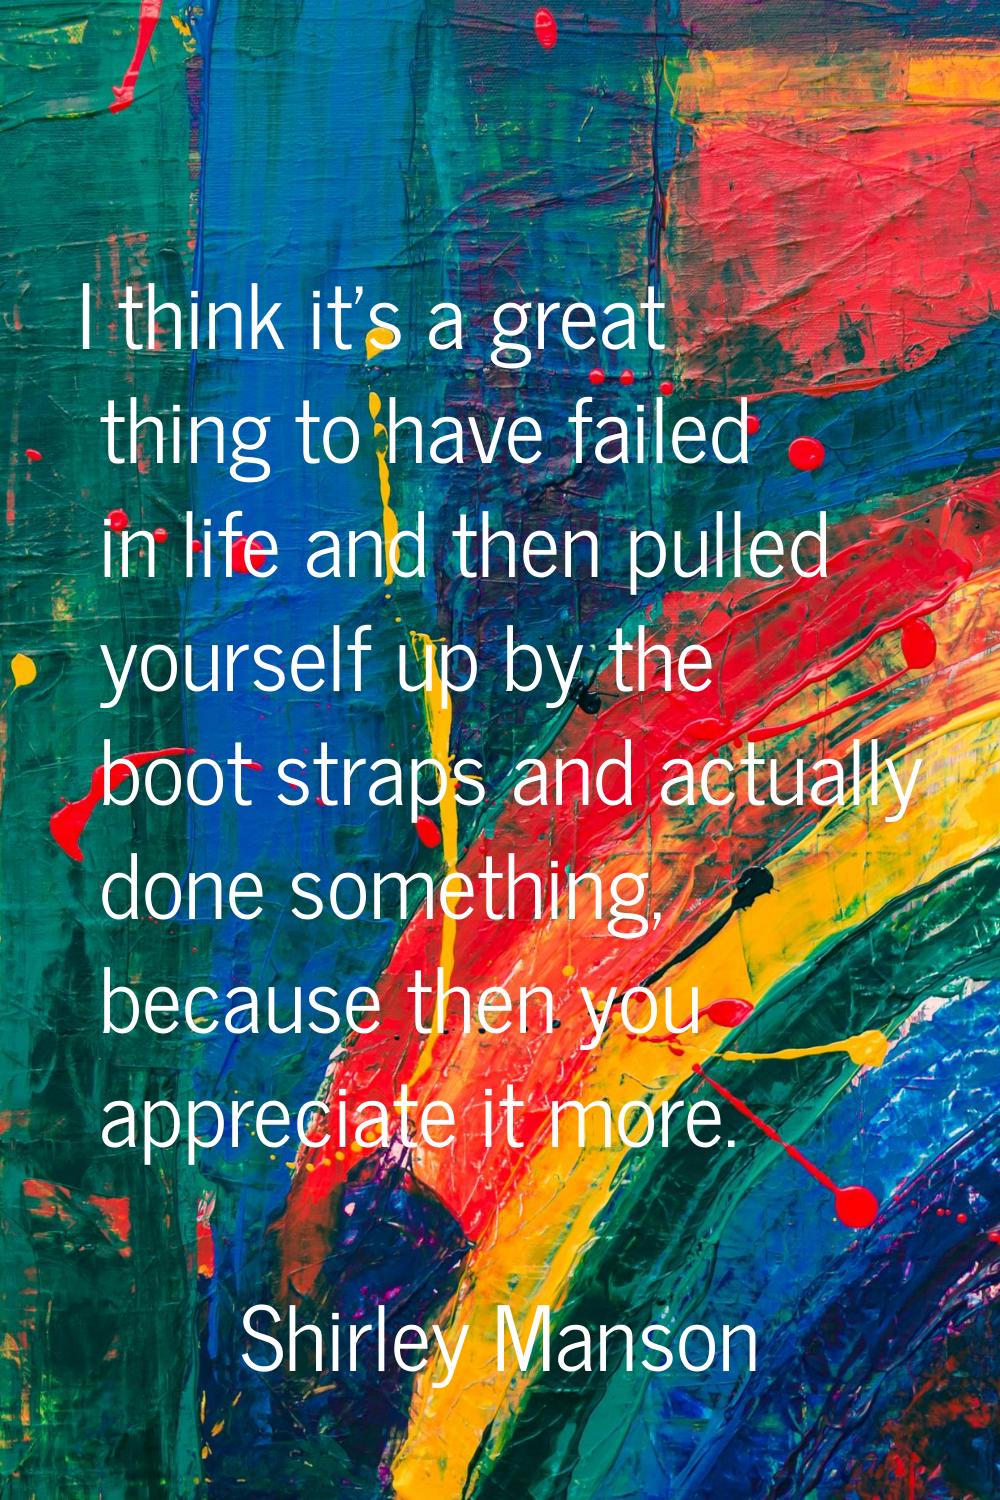 I think it's a great thing to have failed in life and then pulled yourself up by the boot straps an